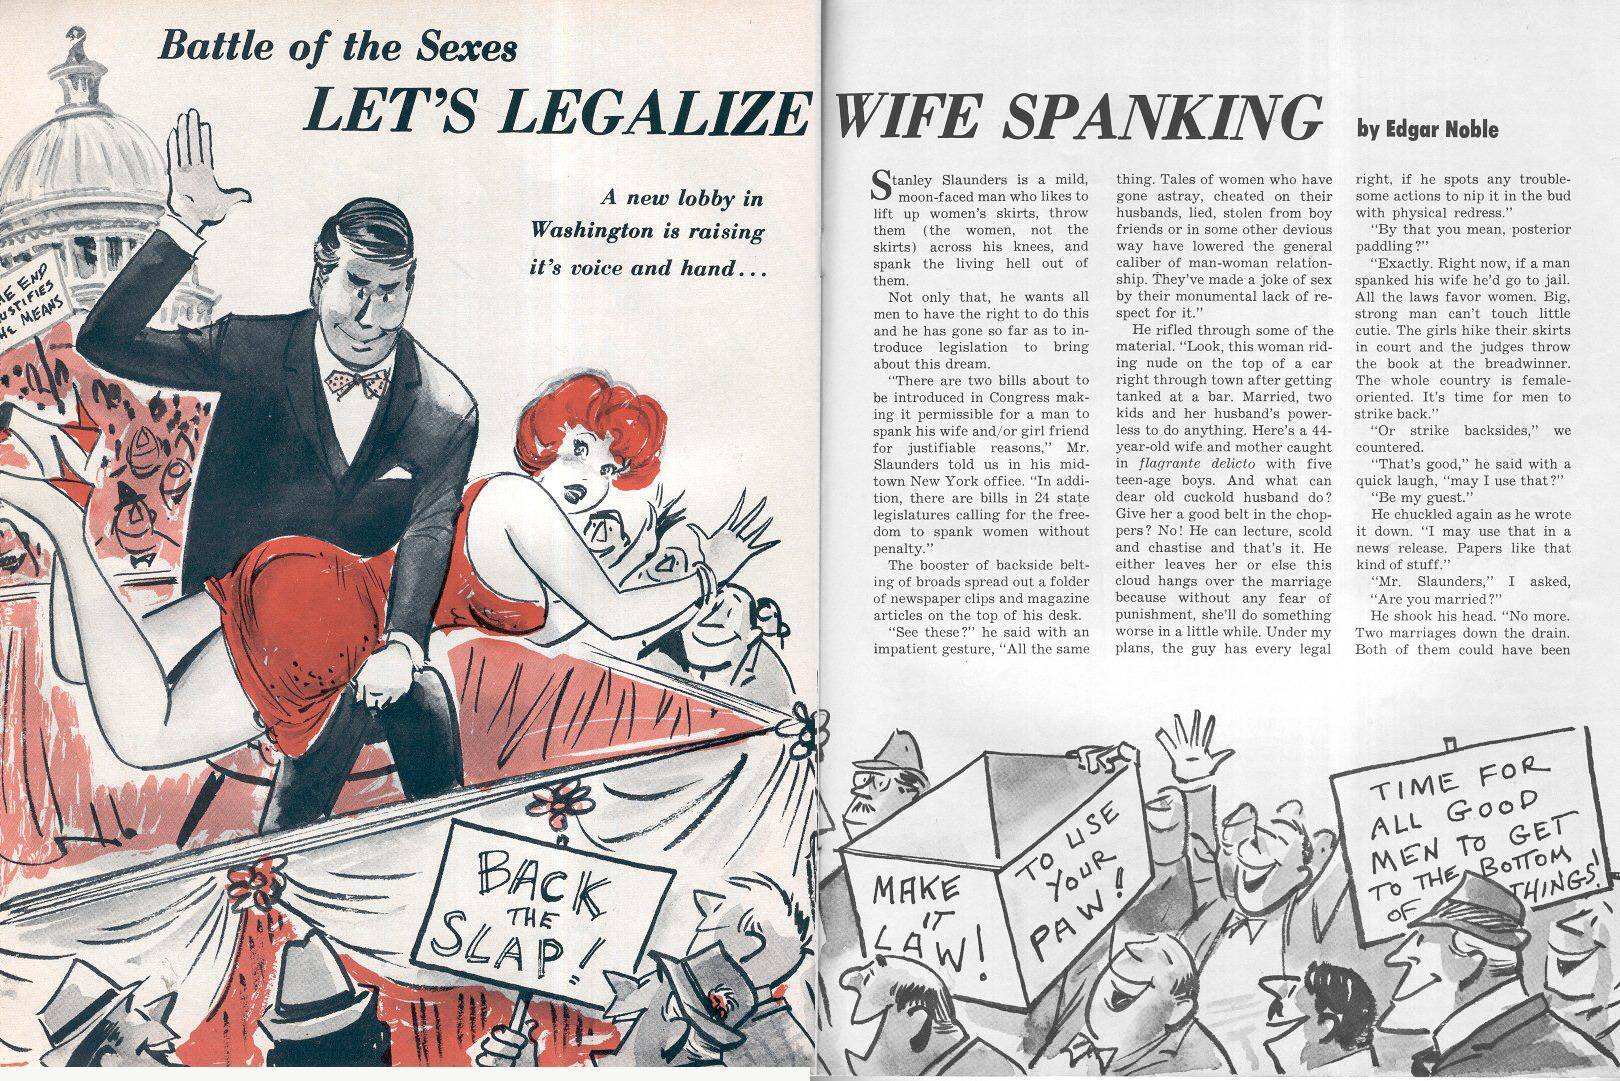 From the article: "Right now, if a man spanked his wife he’d go to jai...